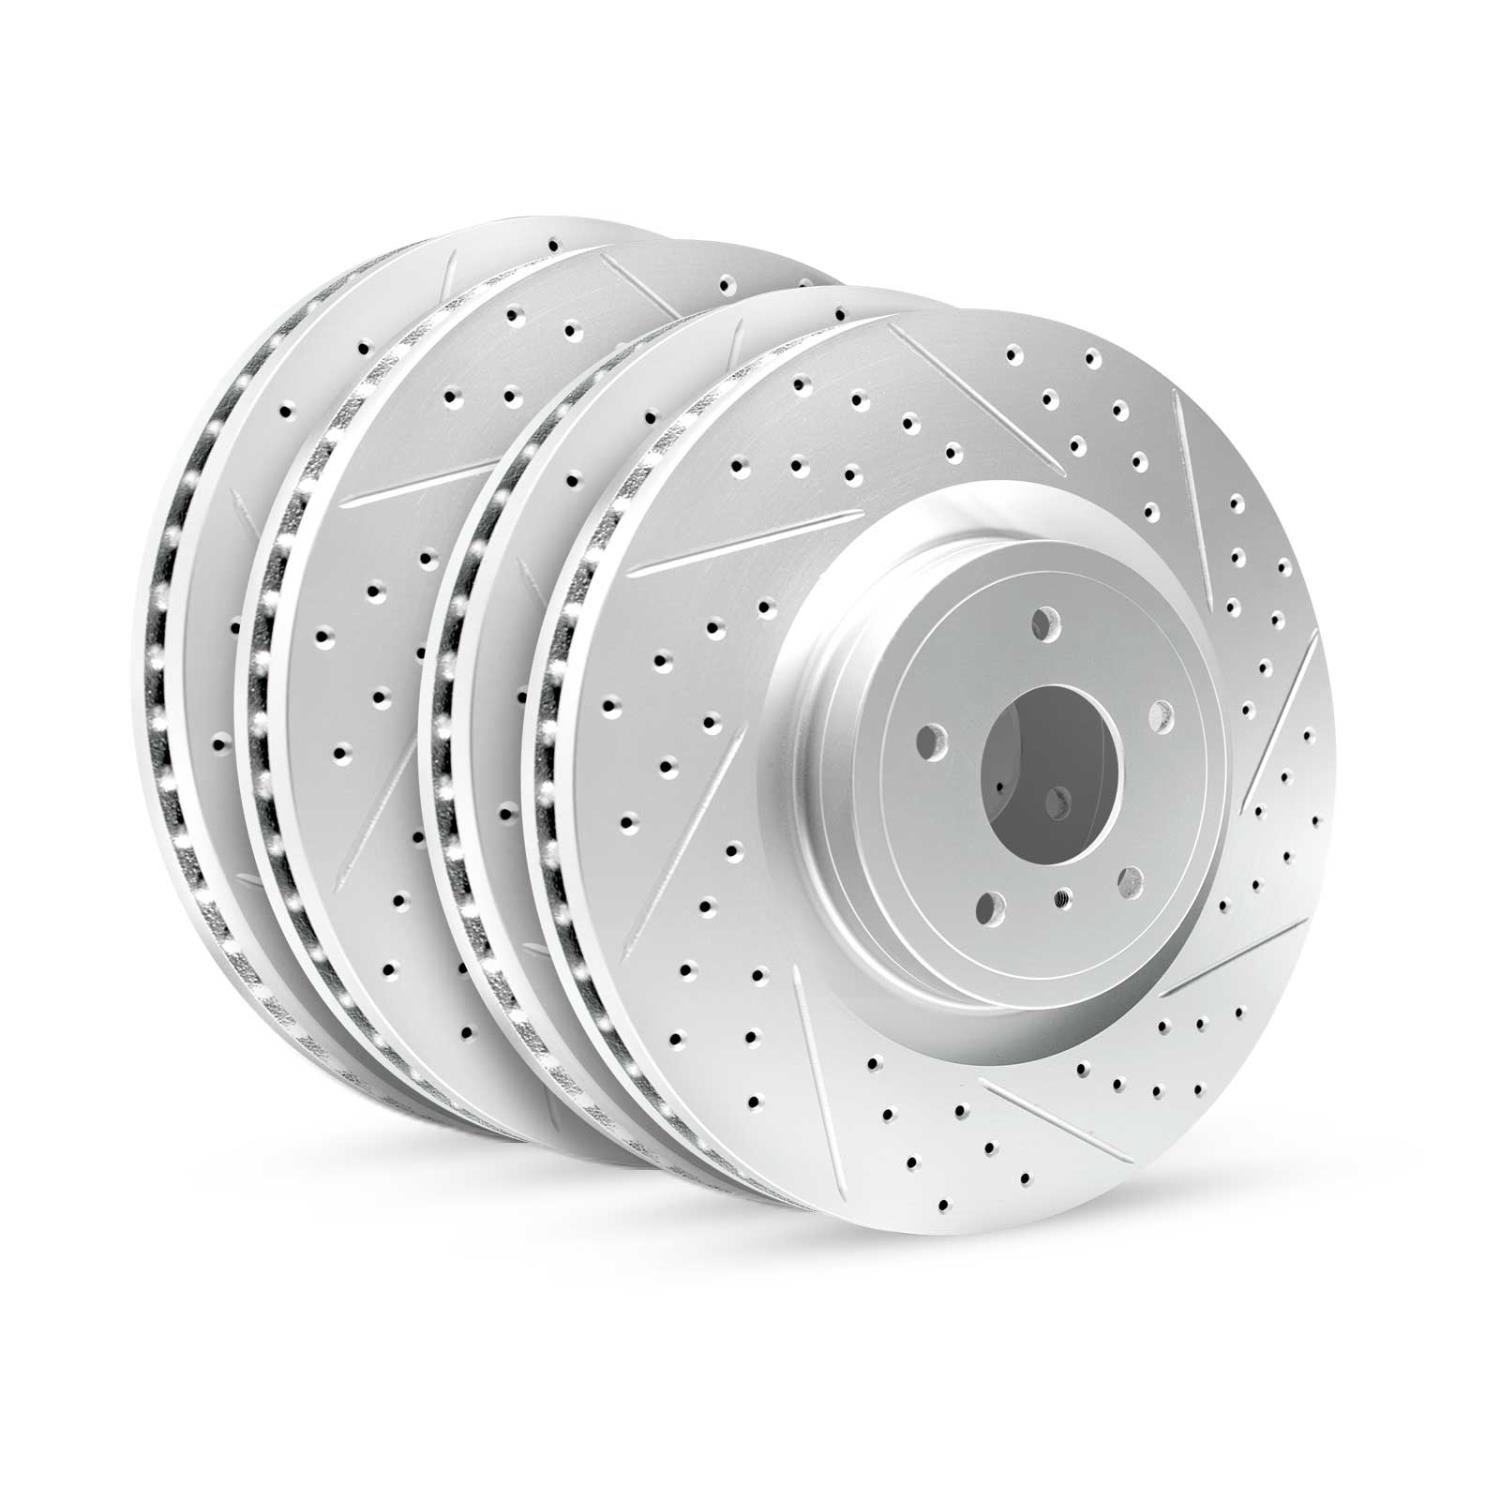 GEO-Carbon Drilled/Slotted Rotors, 2007-2012 Infiniti/Nissan, Position: Front/Rear